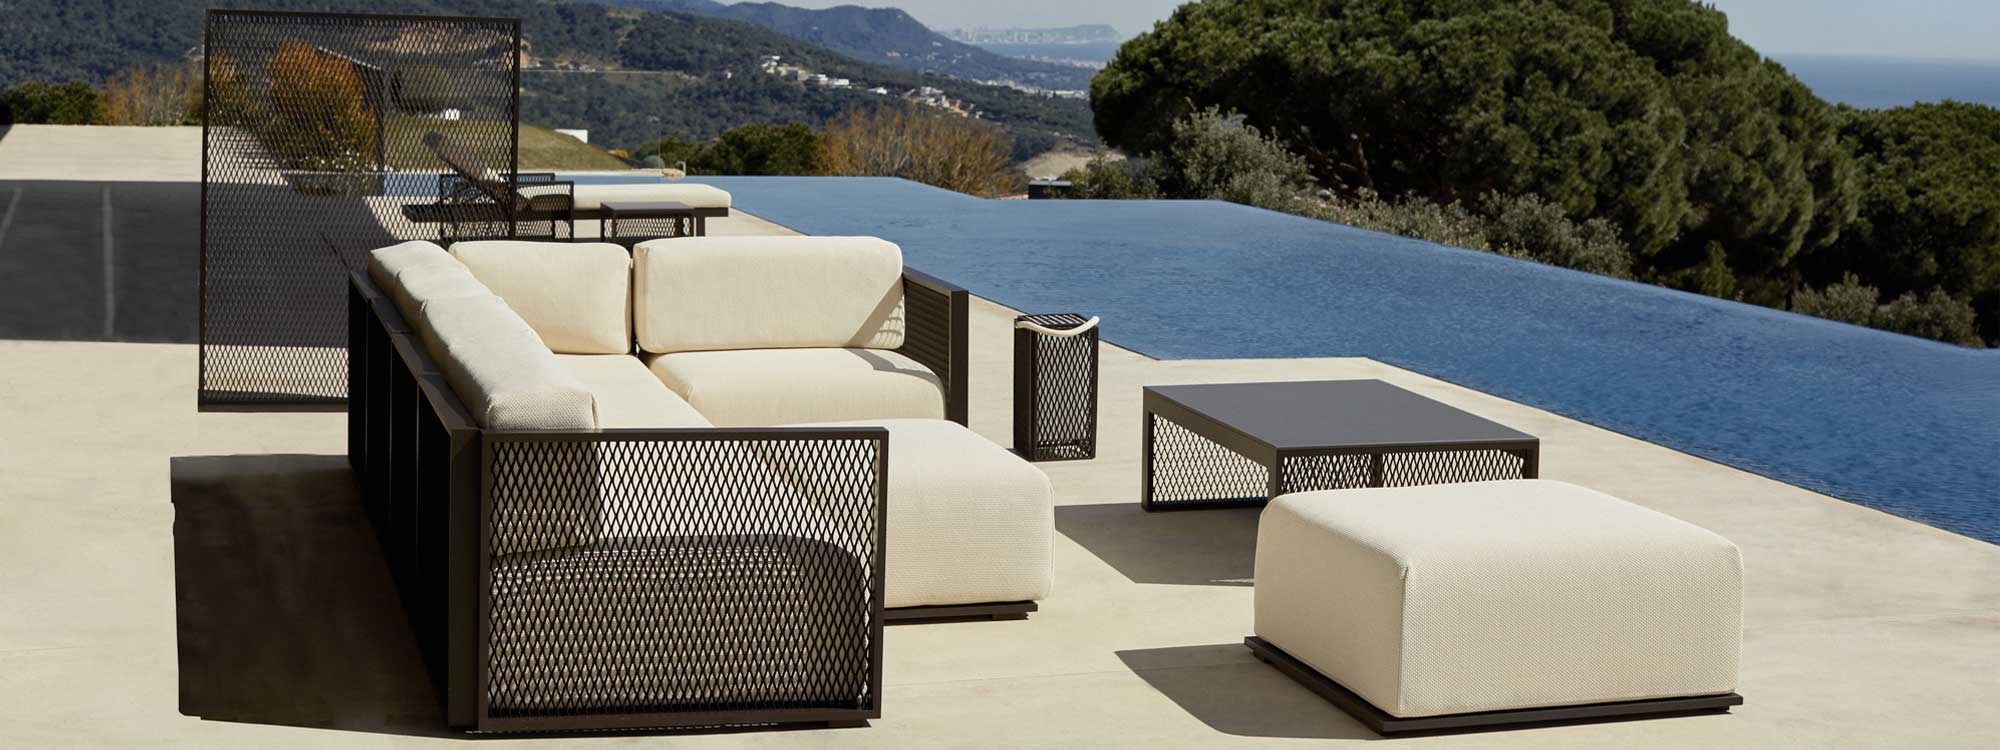 Image of Vondom The Factory modern garden corner sofa and lounge chair on sunny poolside with hills dropping to the coast in the background